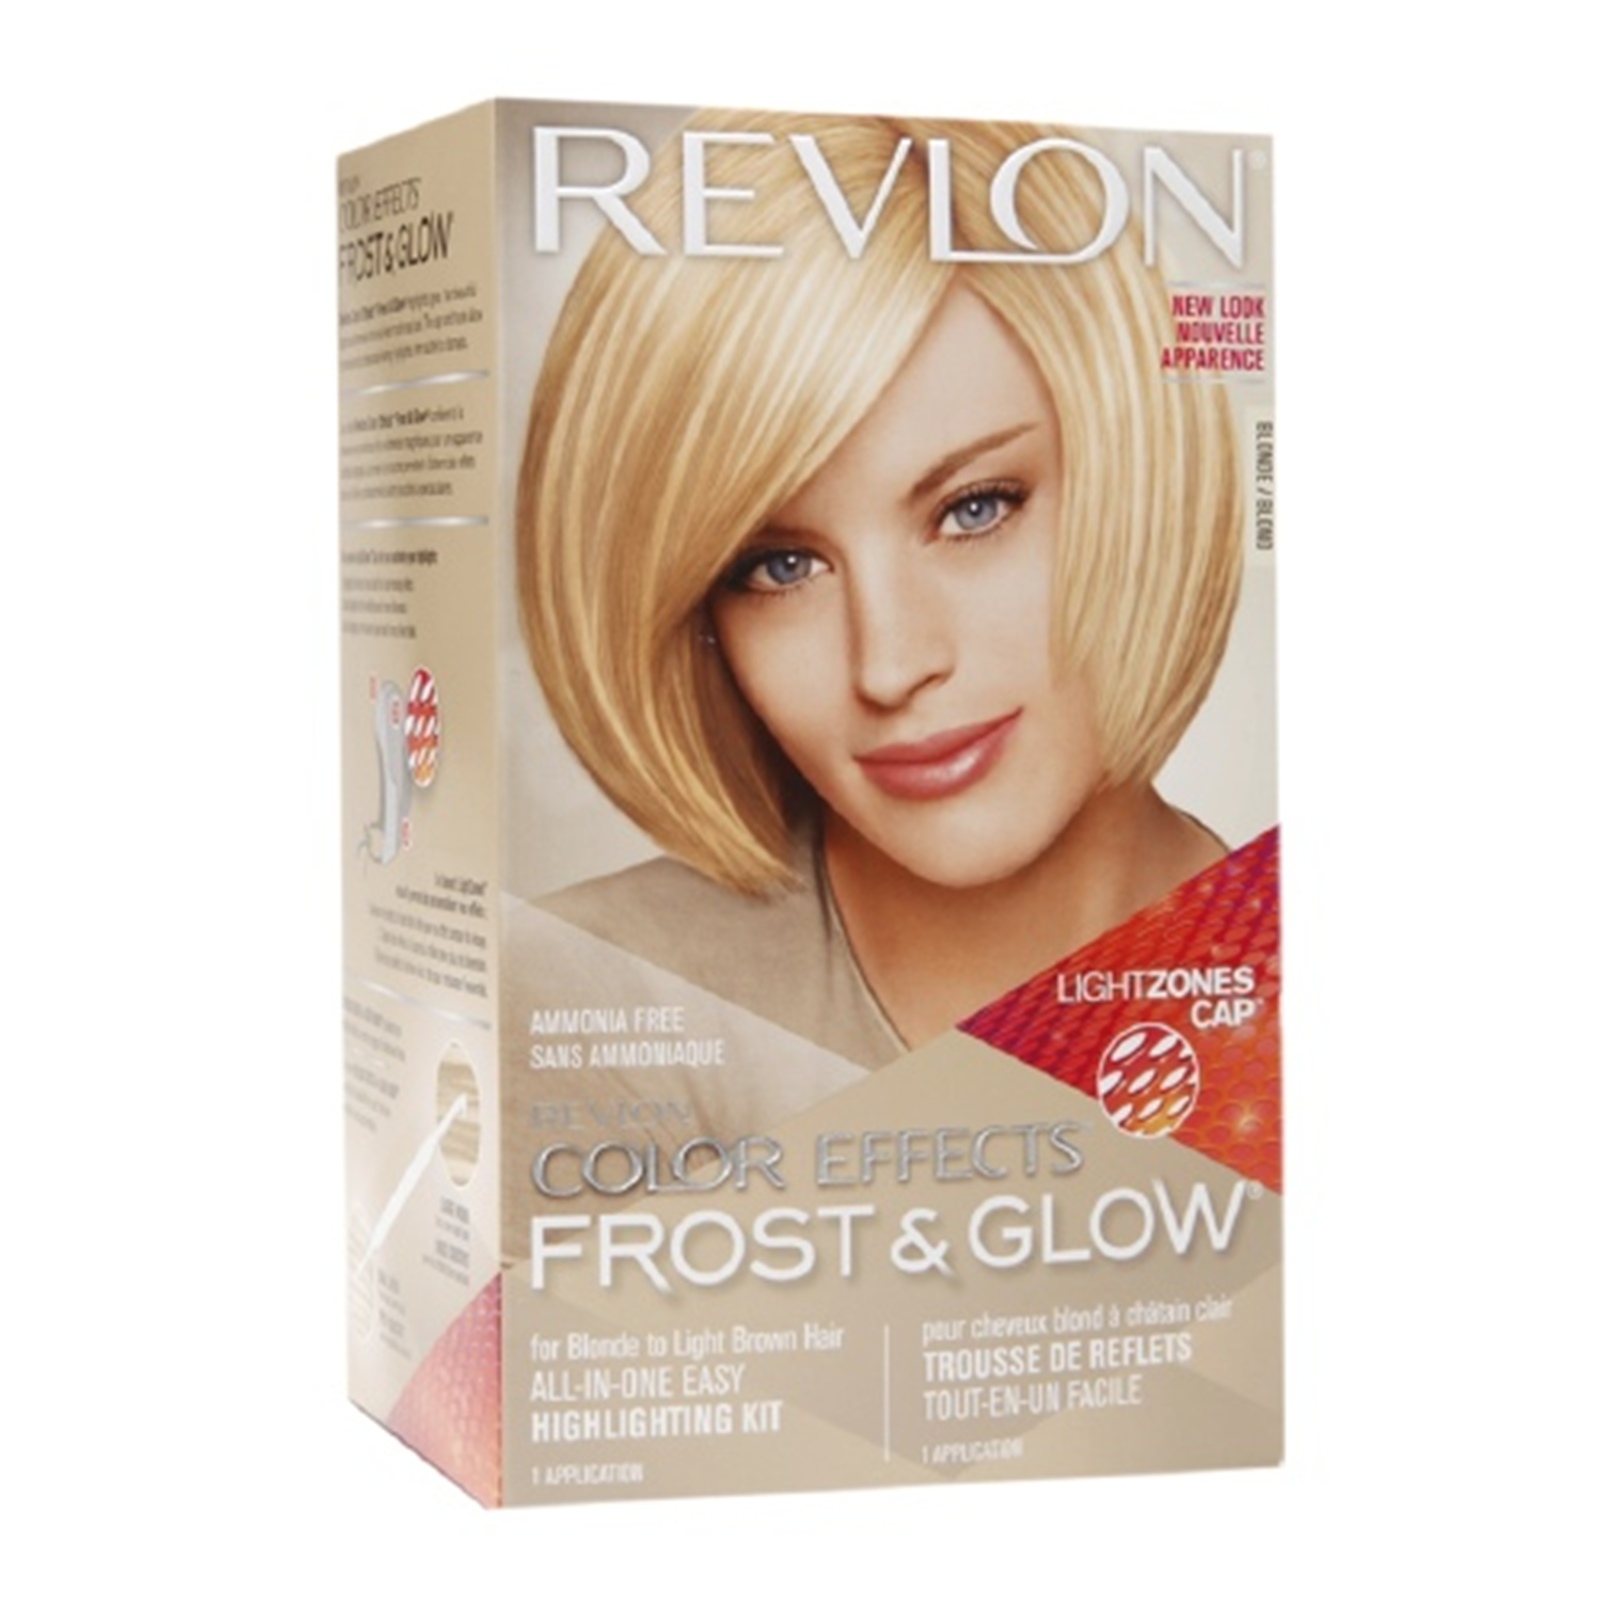 Revlon Color Effects Frost & Glow All-In-One Highlighting Kit 1 Application  Blonde